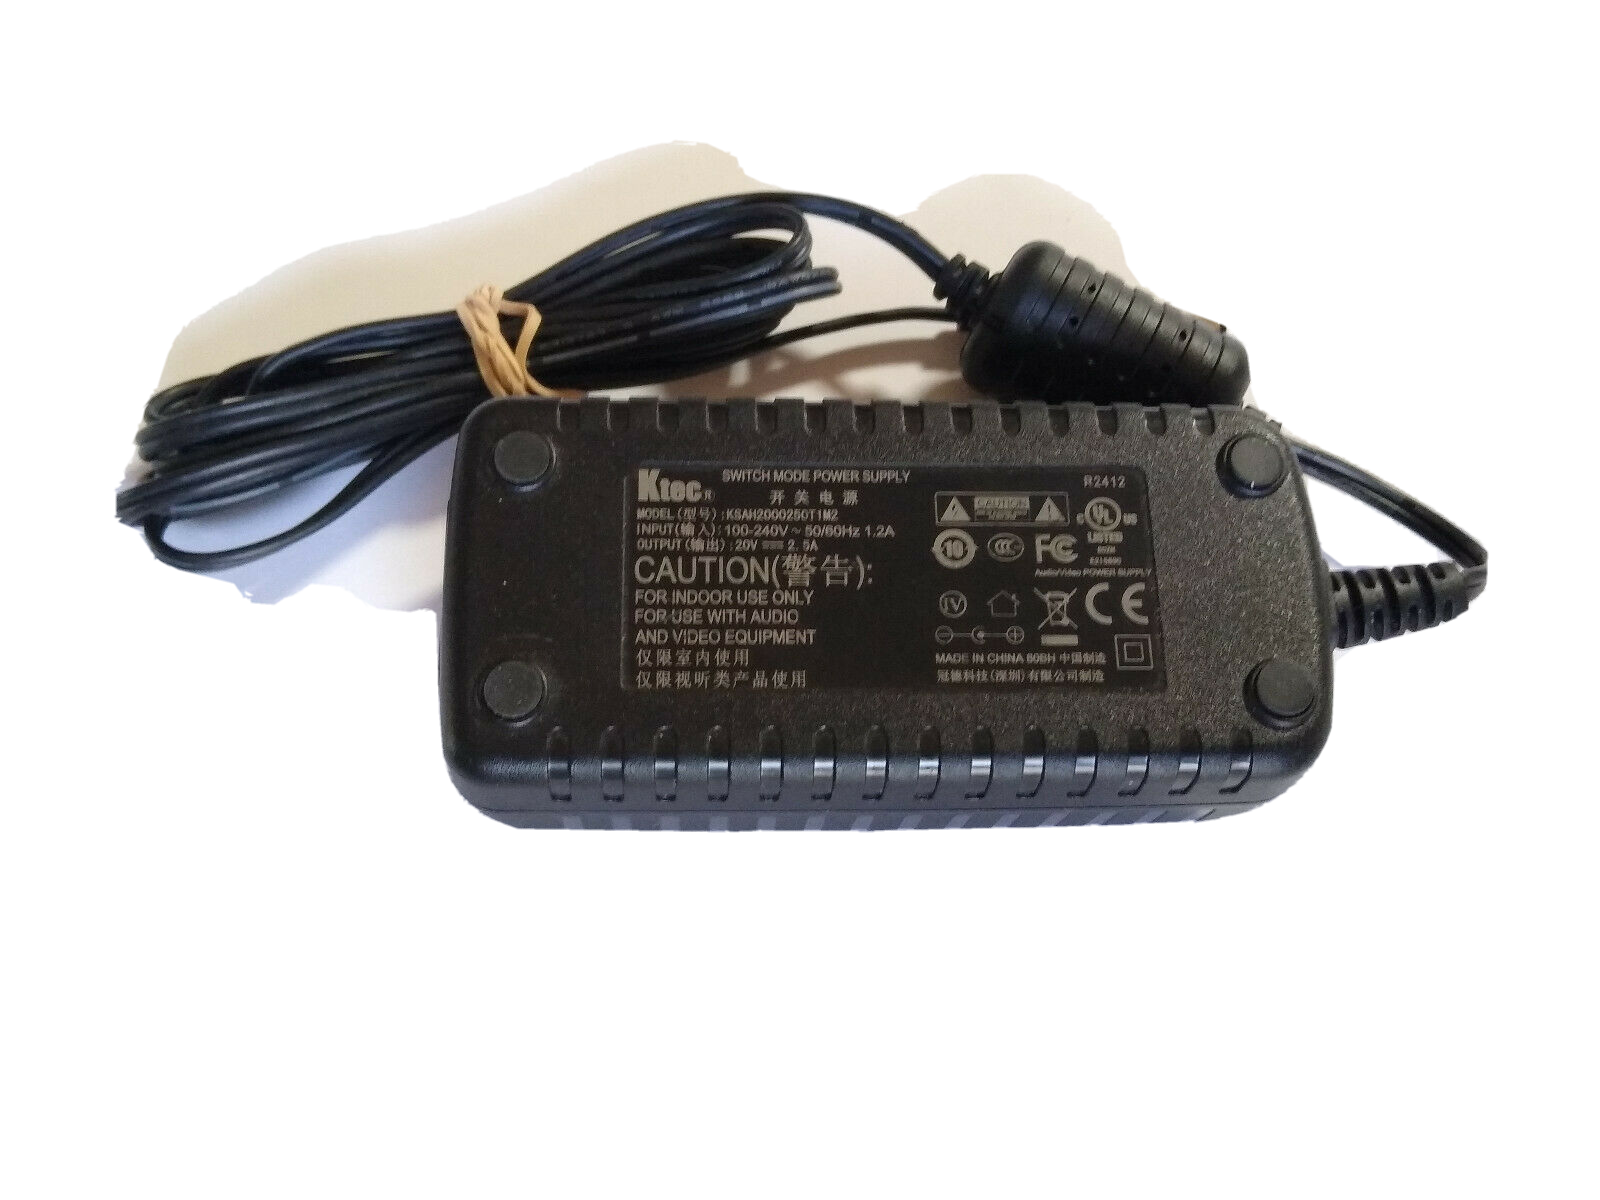 GENUINE Ktec KSAH2000250T1M2 SUPPLY ADAPTER 20V 2.5A Type: Adapter Output Voltage: 20 V Feature